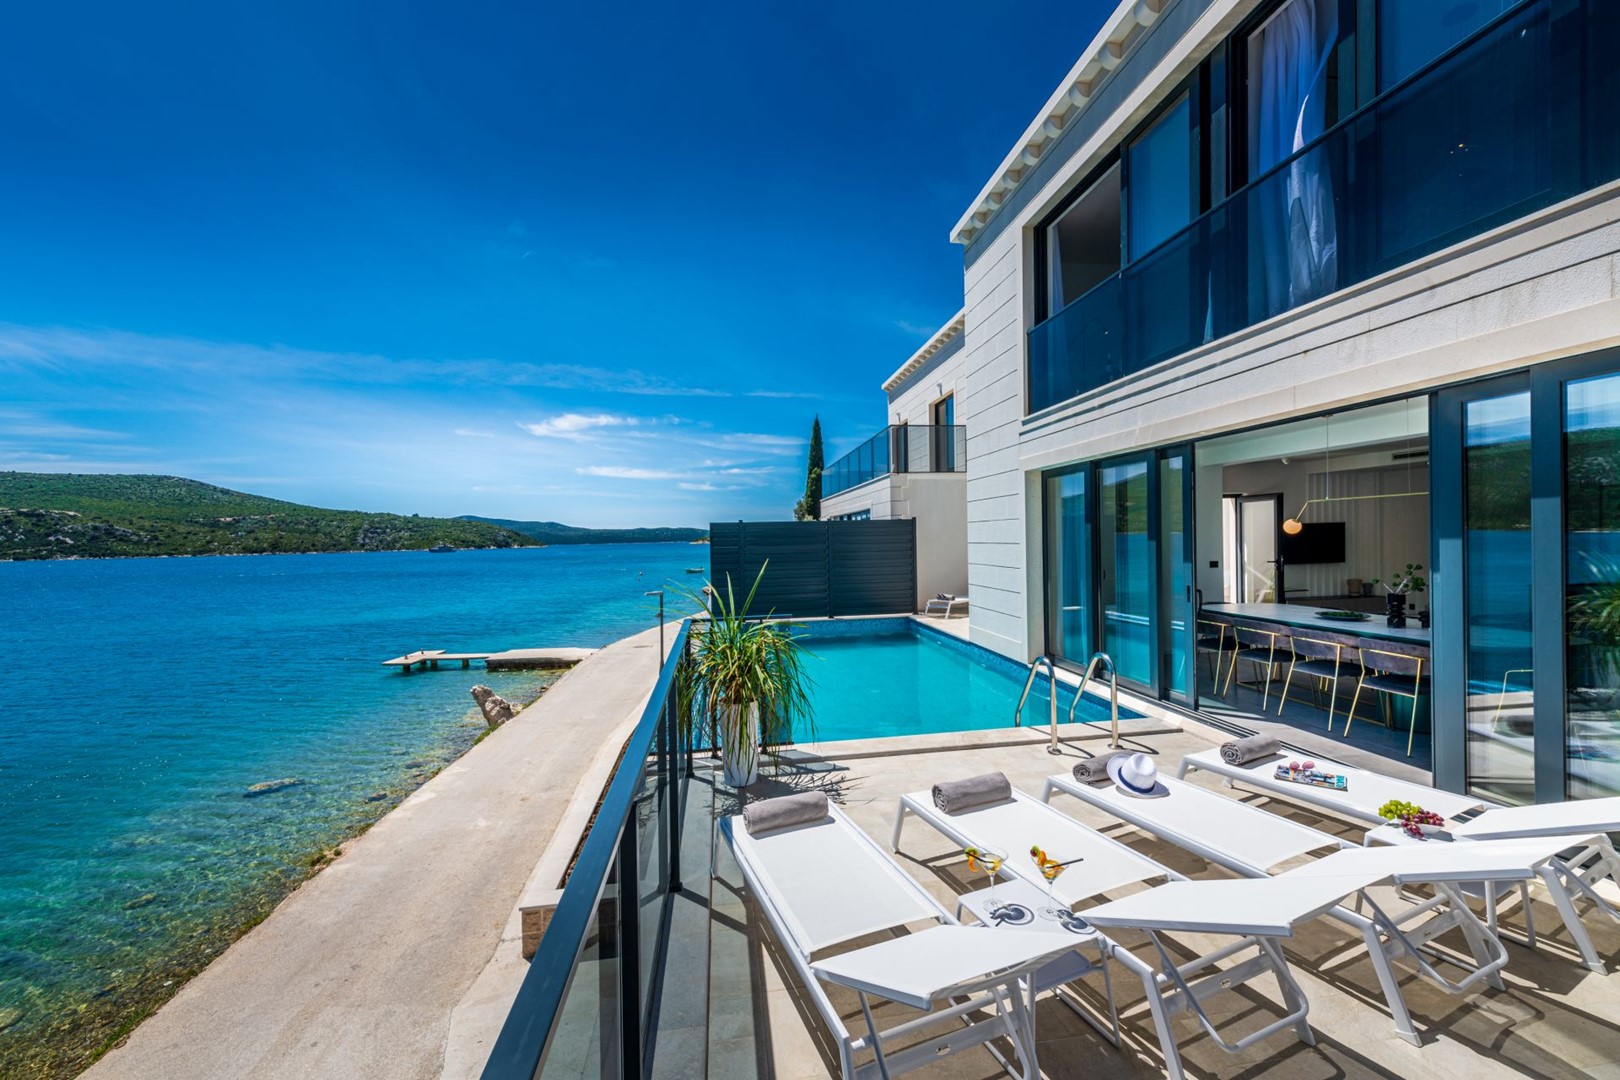 Croatian luxury beachfront villa Zaira with private pool surrounded by deckchairs and sundeck for vacation and rent